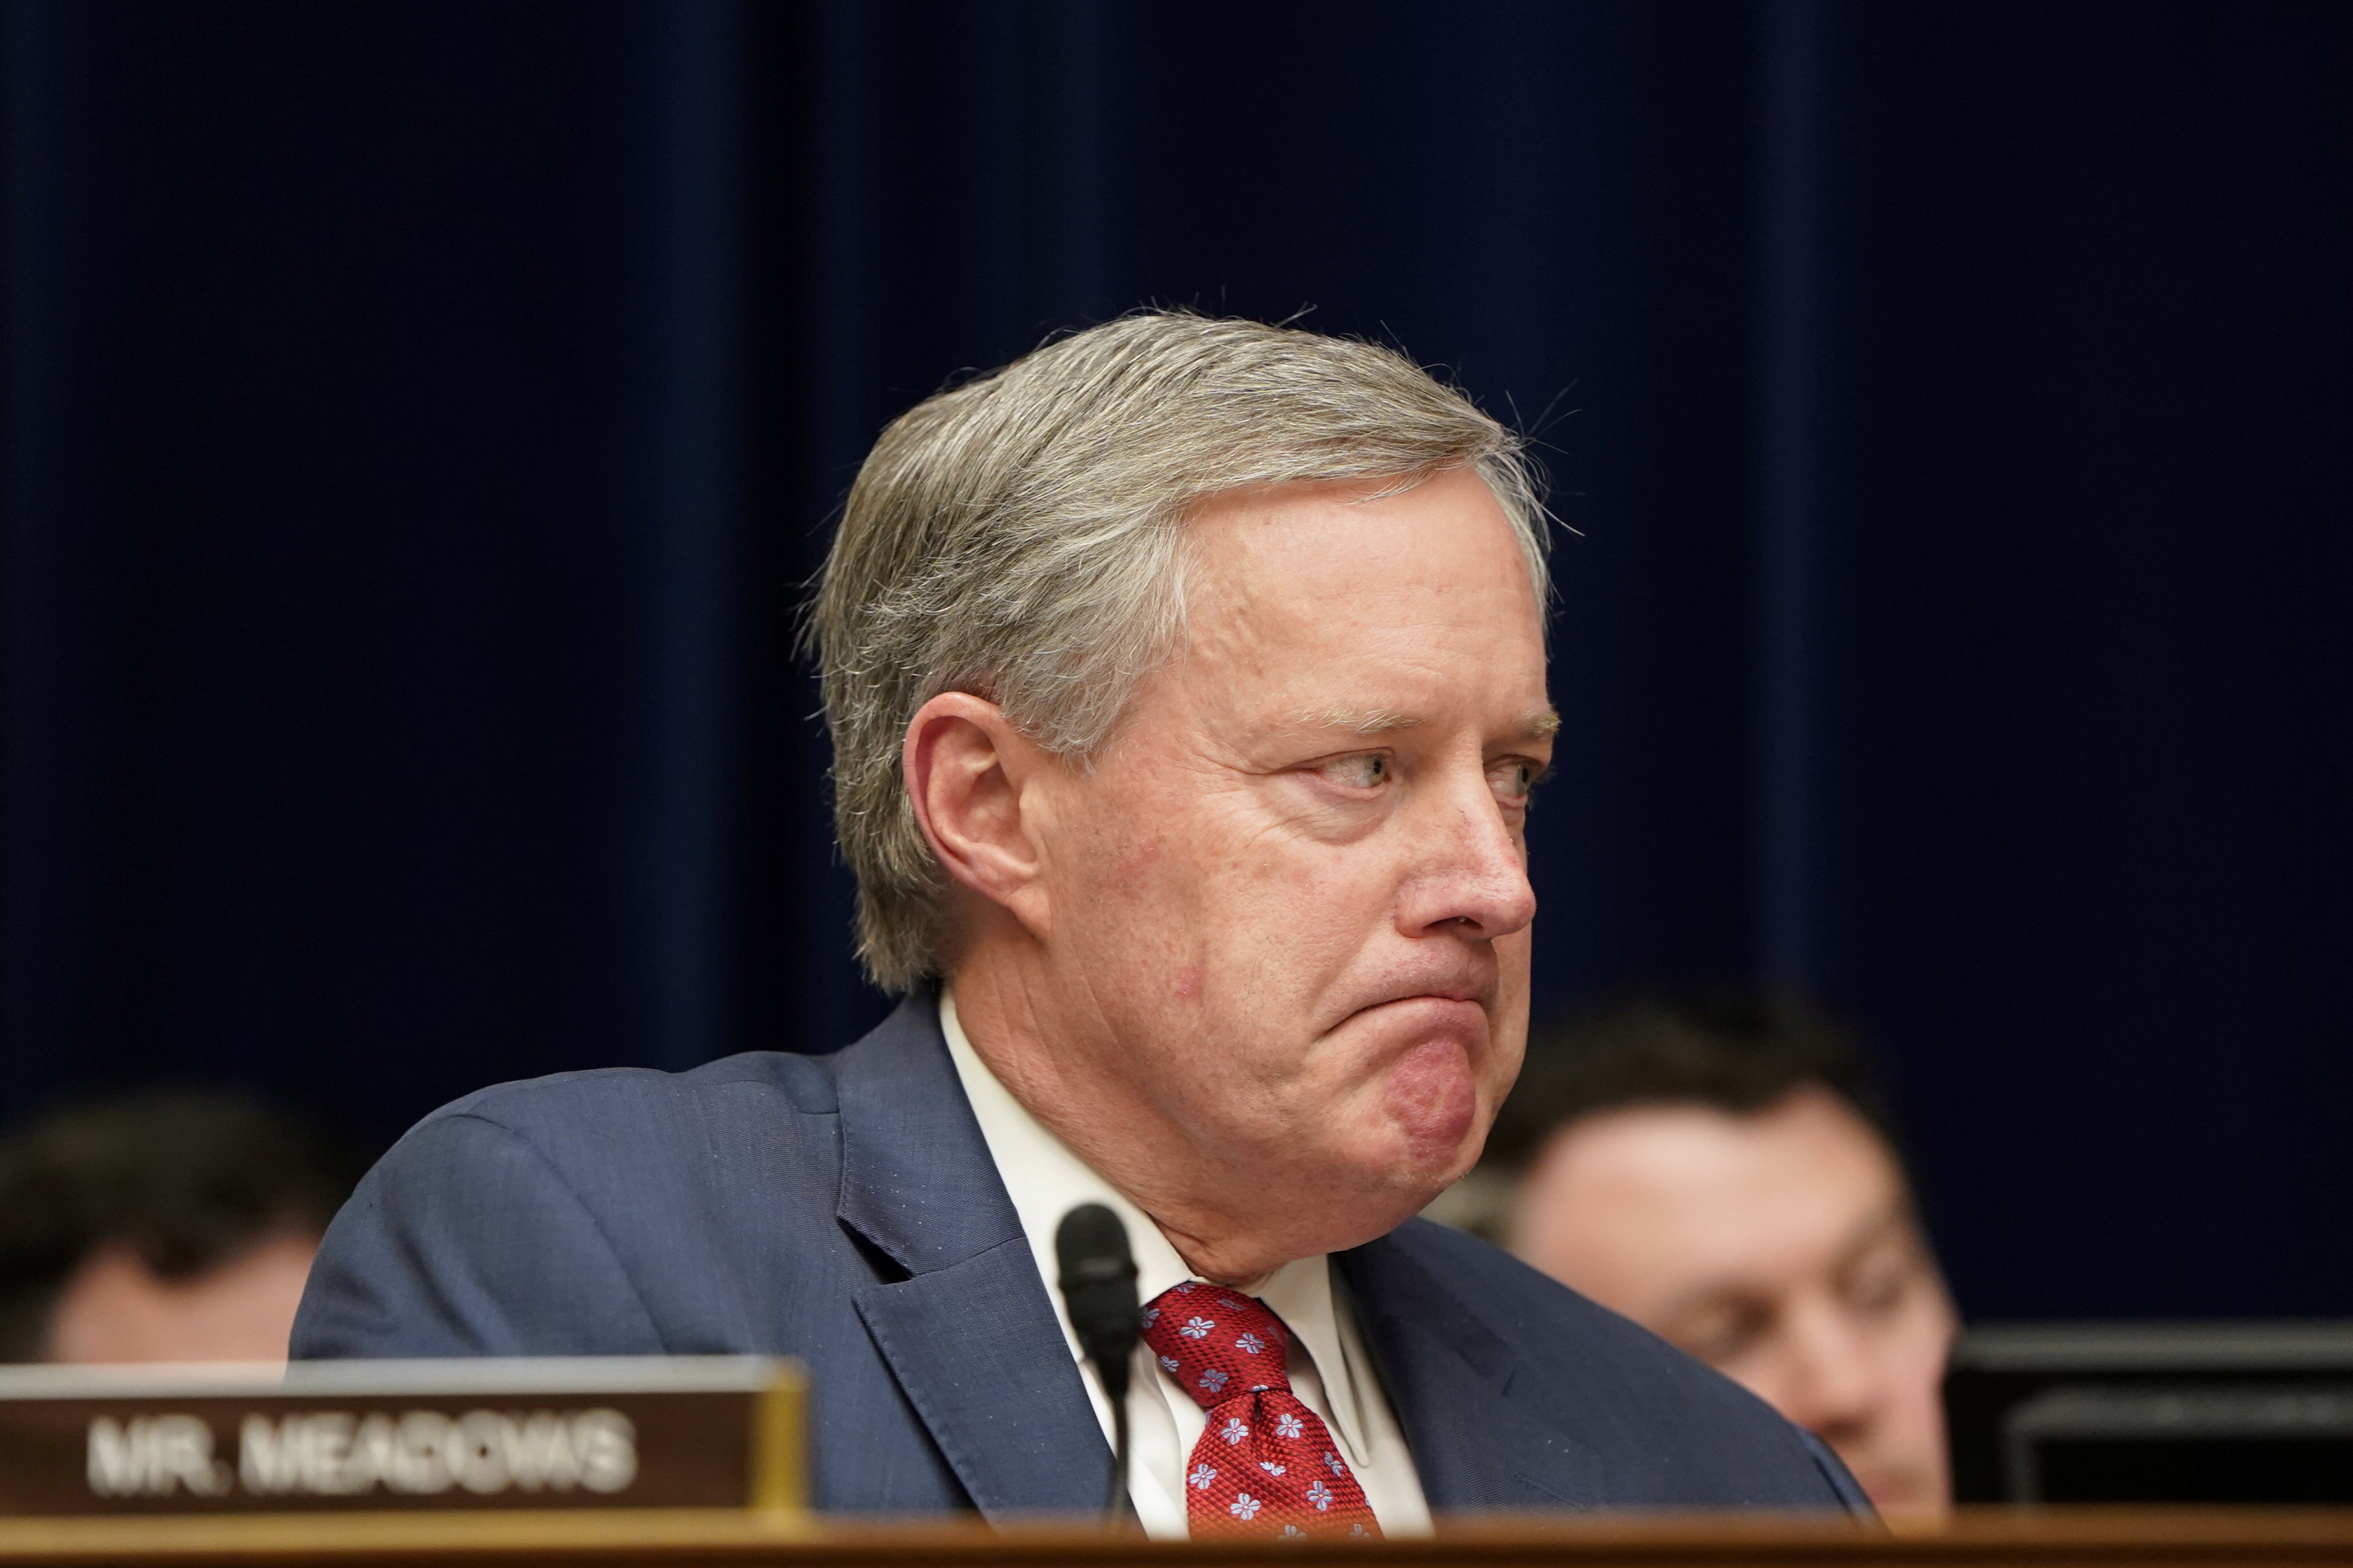 Rep. Mark Meadows reacts while listening to fellow Representative Rashida Tlaib (D-MI) speak during the testimony of Michael Cohen at a House Committee on Oversight and Reform hearing on Capitol Hill in Washington on February 27, 2019. 